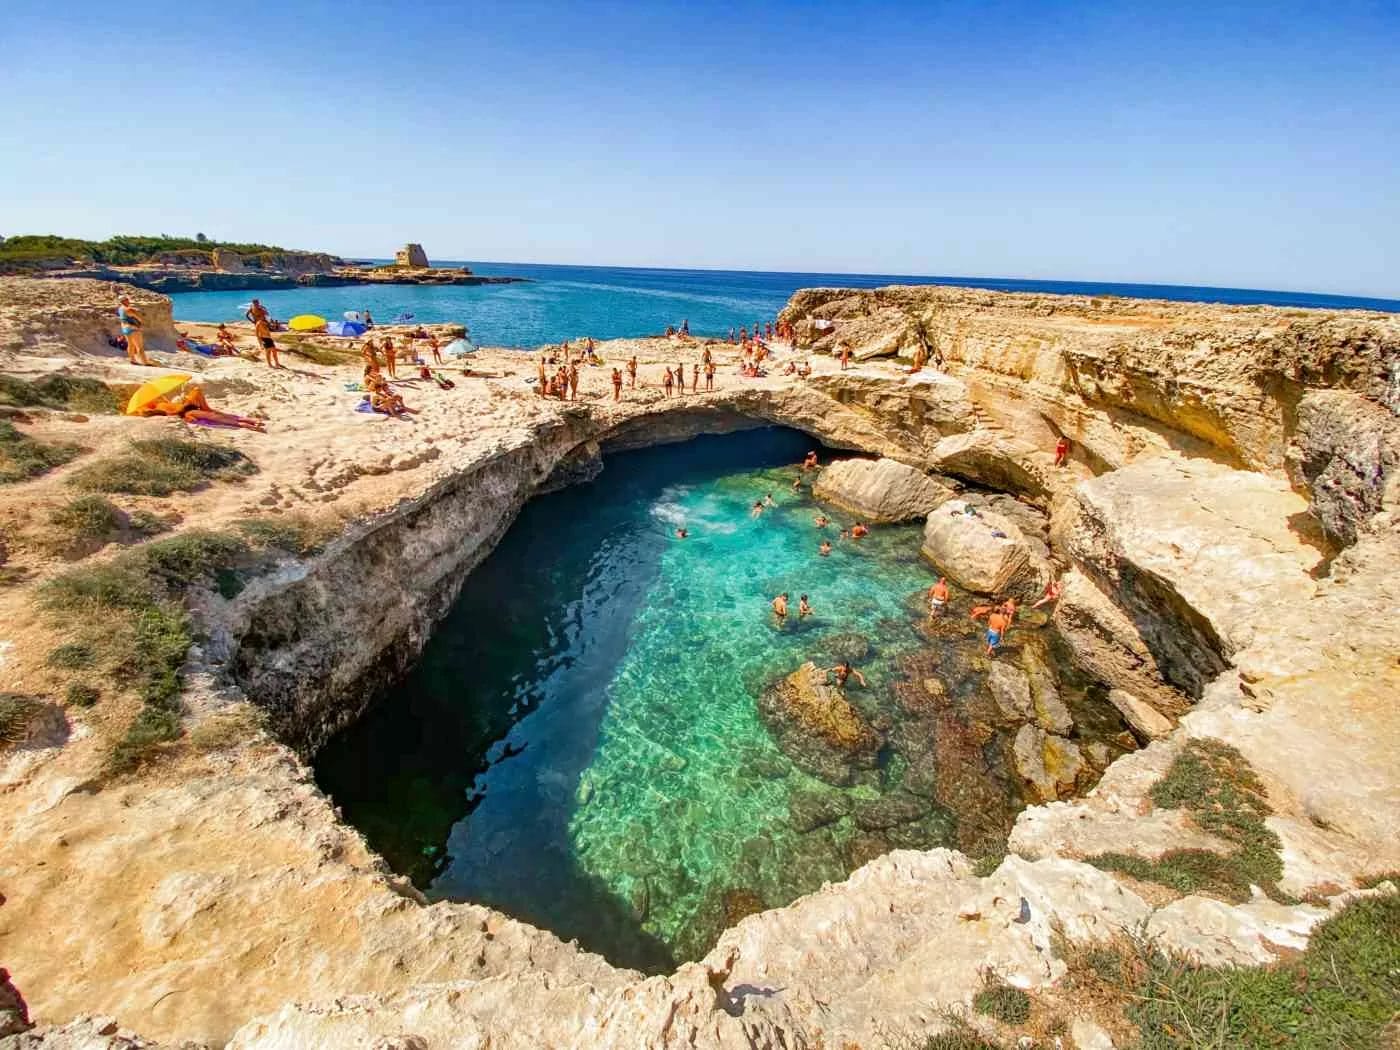 grotta della poesia in puglia - one of the best swimming holes to stop on a road trip